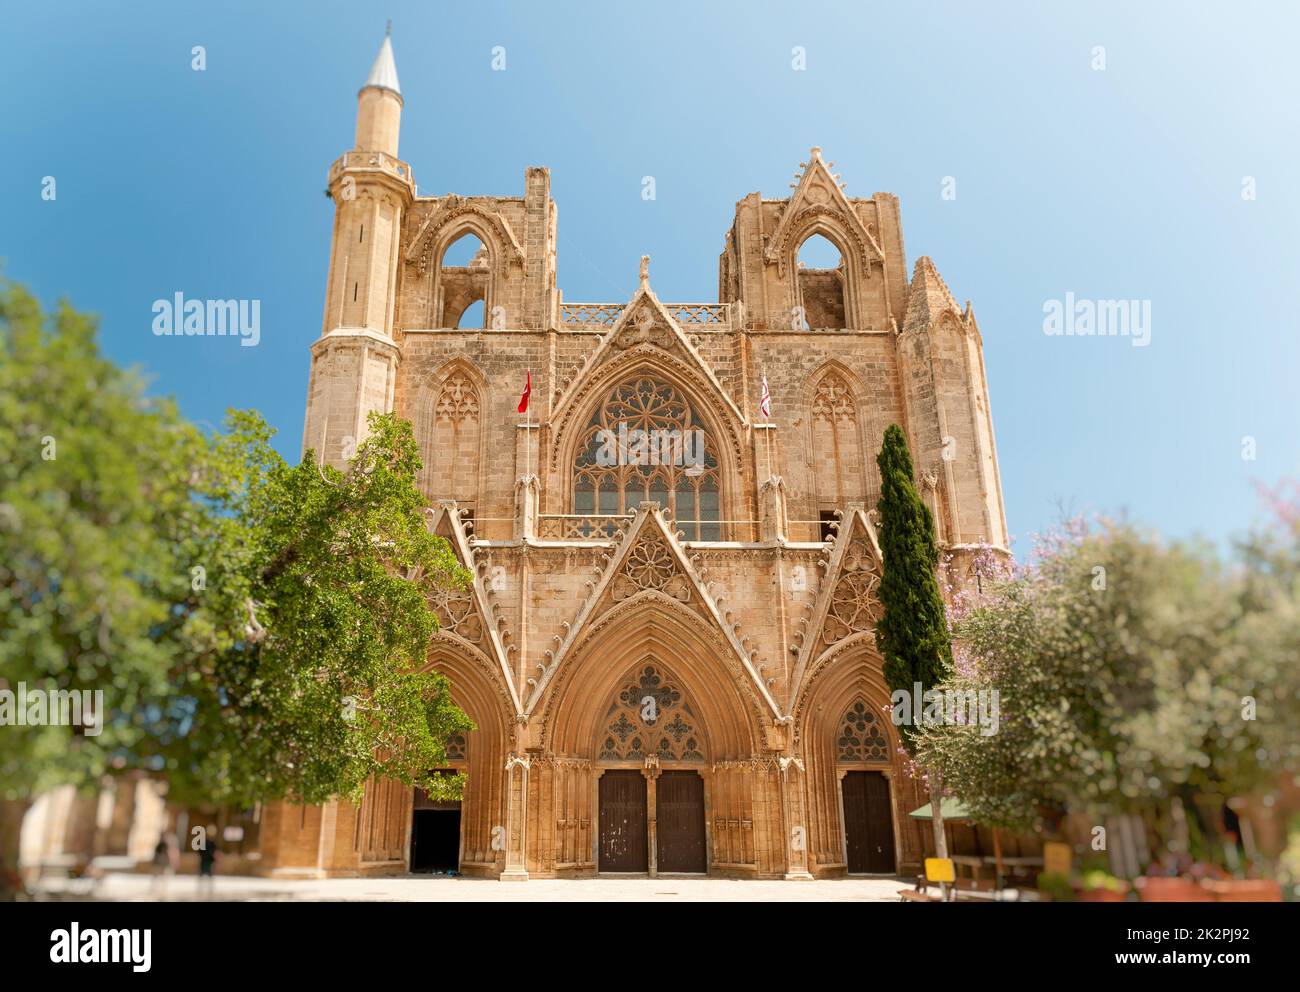 Lala Mustafa Pasha Mosque (formerly St. Nicholas Cathedral), Famagusta, Northern Cyprus. Front view Stock Photo